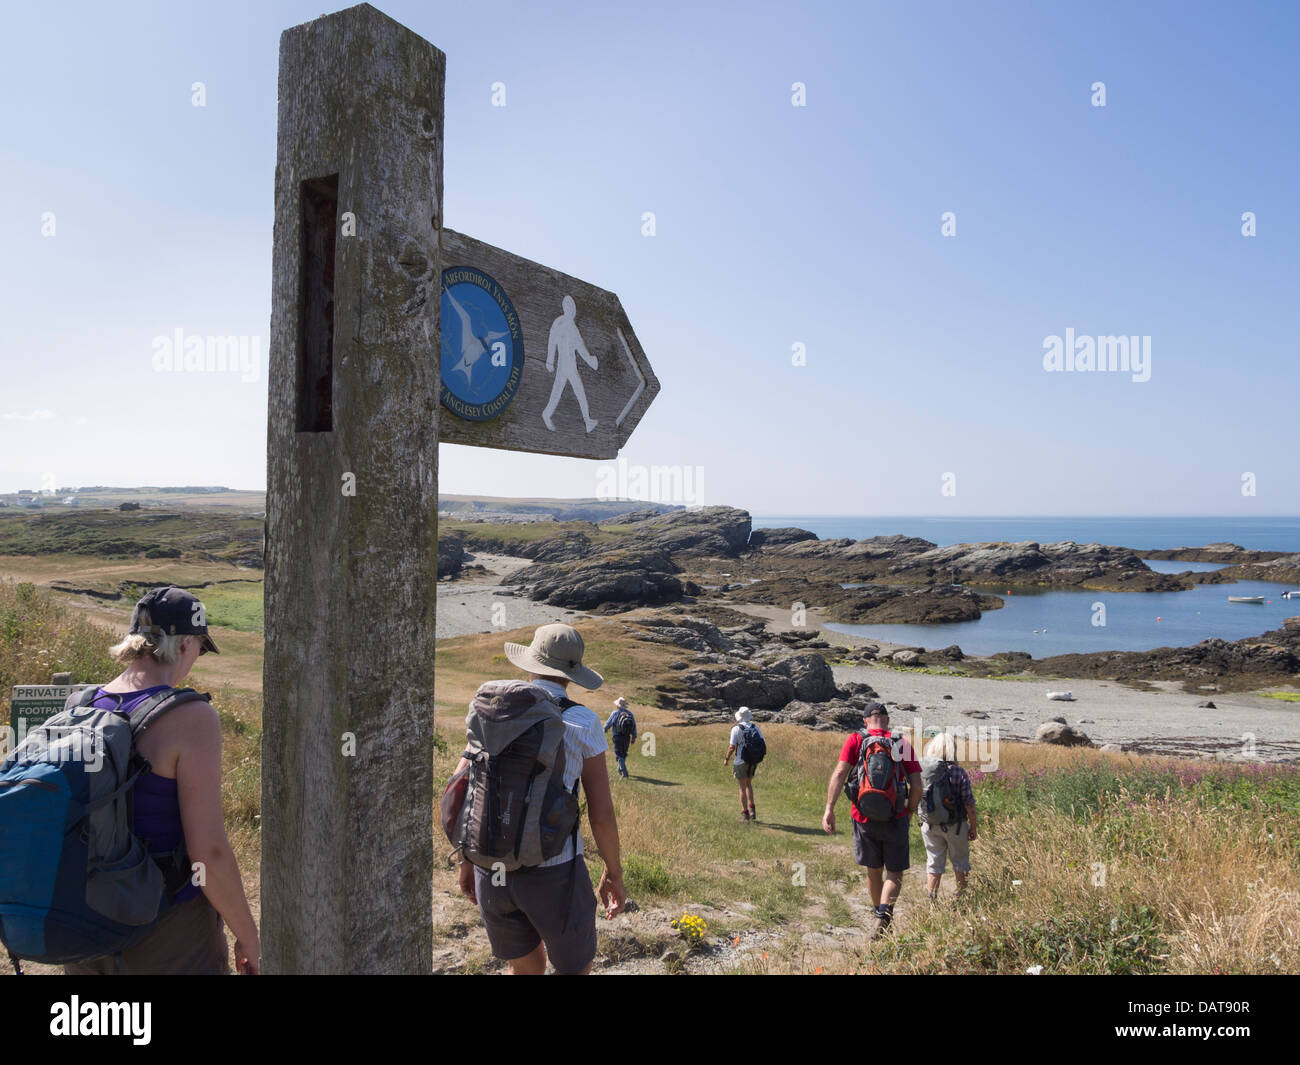 Ramblers walking by public footpath signpost on Isle of Anglesey Coastal Path at Porth-y-Garan Trearddur Holy Island Anglesey North Wales UK Stock Photo